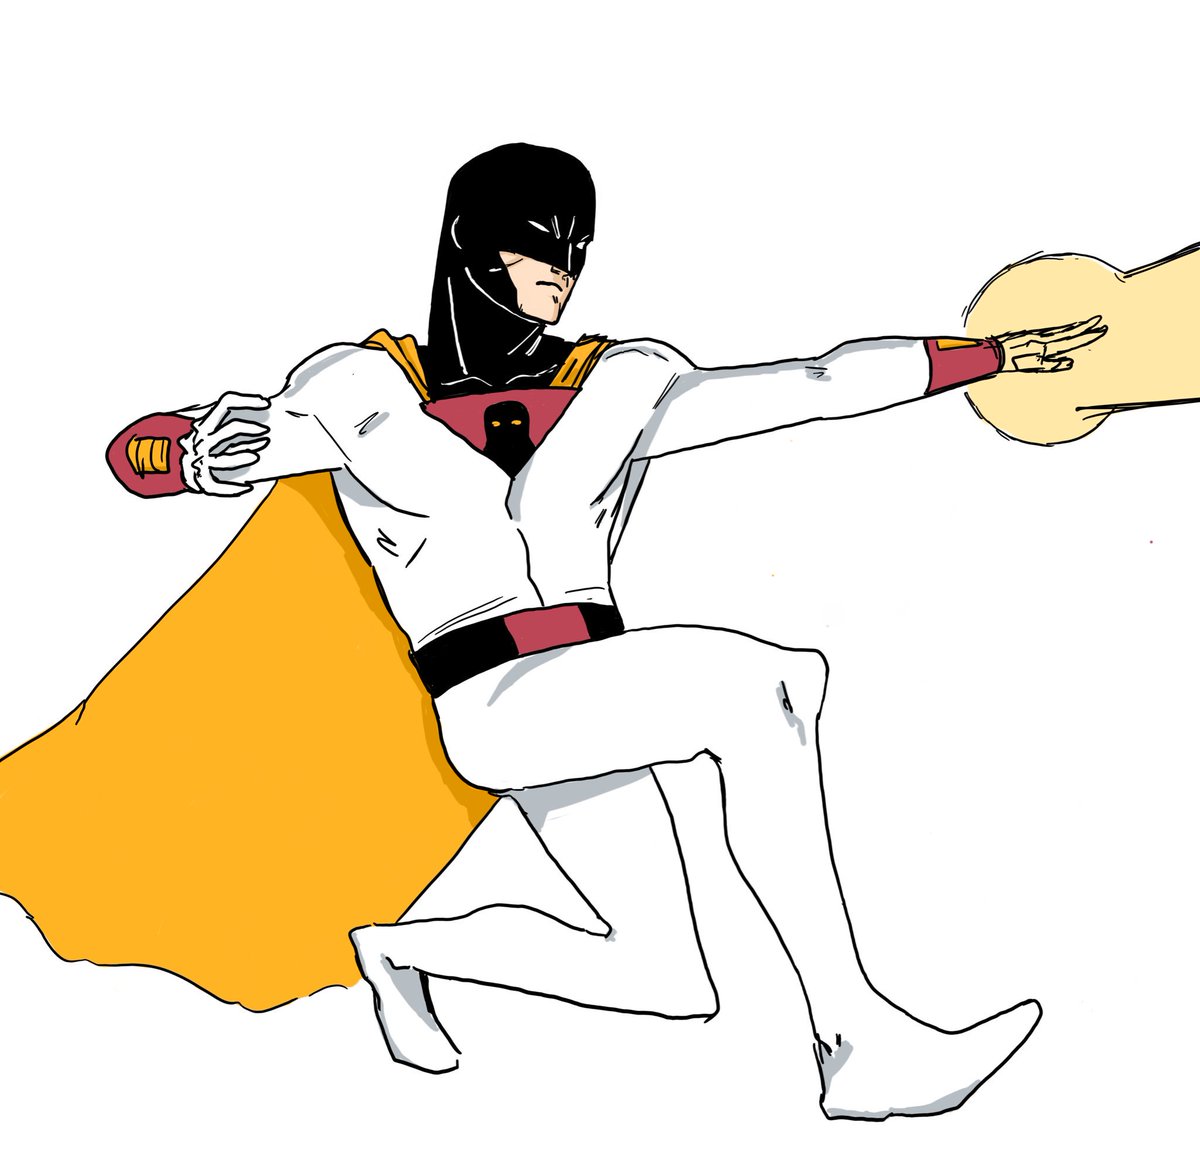 #dailydrawfebruary 10: Space Ghost 
(Space Ghost)

#dailydrawfebruary2019